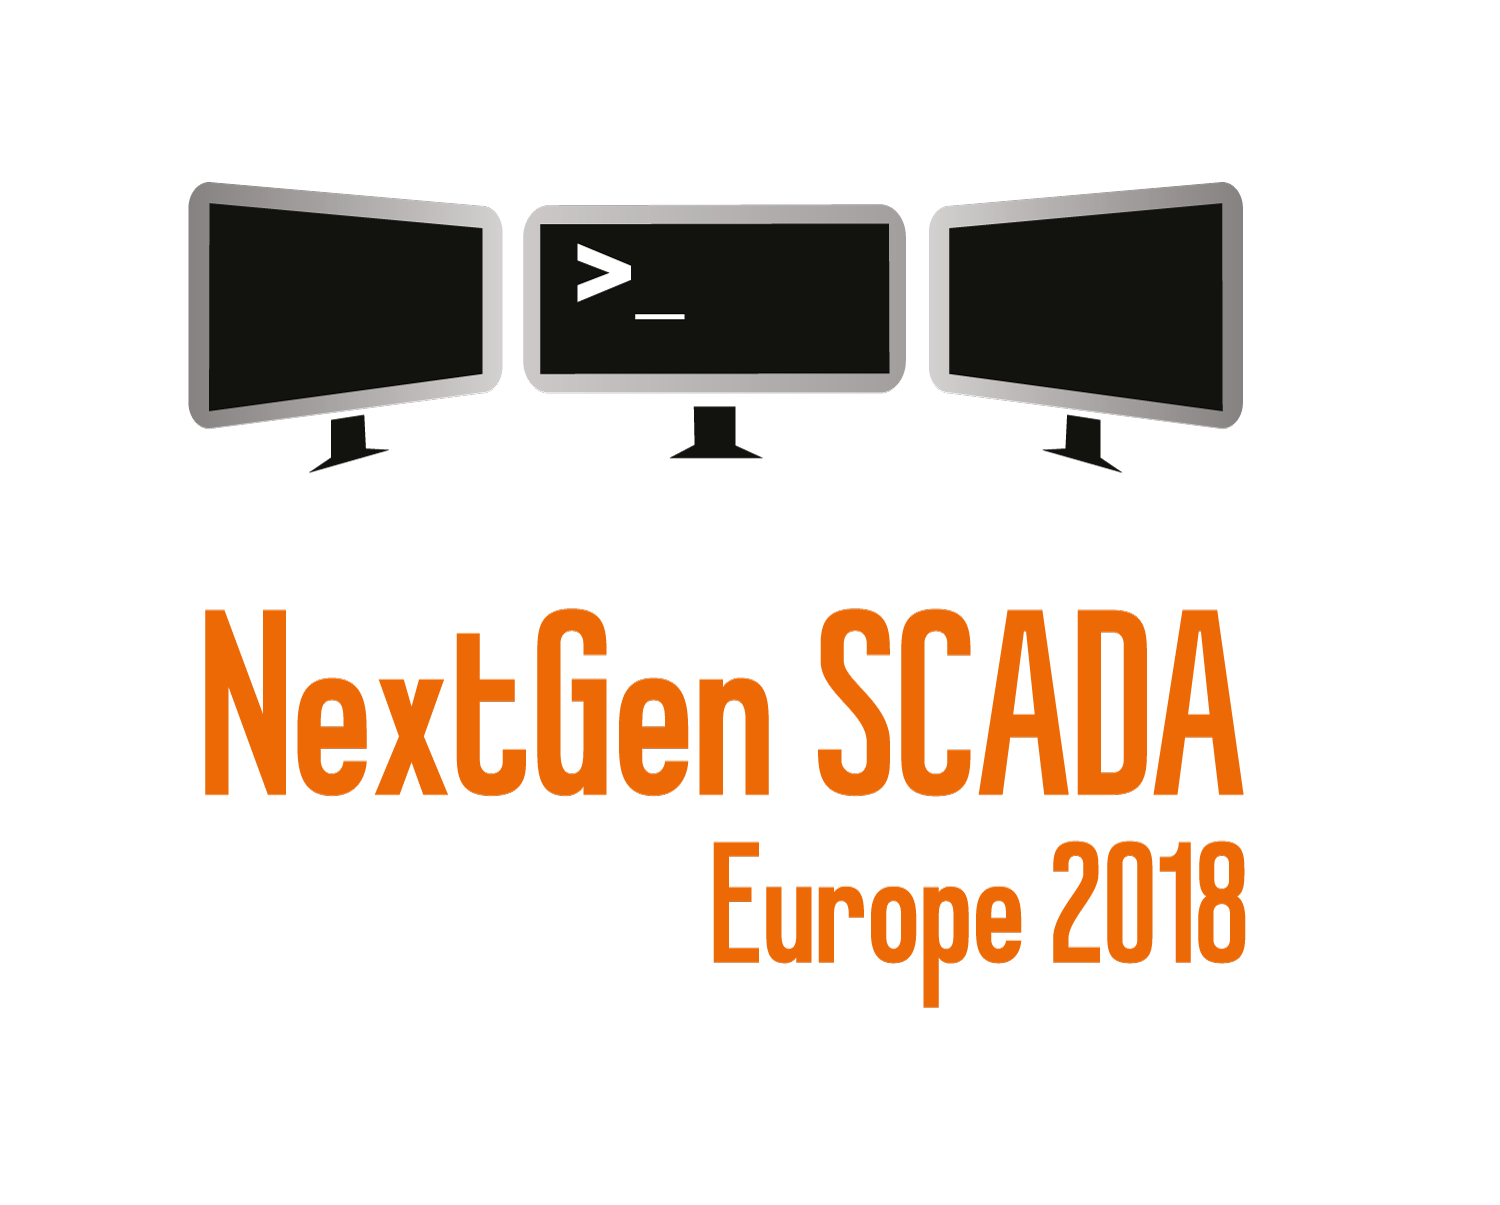 Integrating High Functionality Cyber-Secure SCADA Systems into the Digital Grid
30 January - 1 February 2018 | Novotel Amsterdam City, The Netherlands

The 5th annual NextGen SCADA Europe 2018 conference, exhibition and networking forum takes place 30 January - 1 February 2018, in Amsterdam, The Netherlands The event provides a review of recent implementations of advanced SCADA systems within TSO and DSO environments, and a roadmap for future system architecture, integration and functionality requirements to meet the needs of the digital grid. 